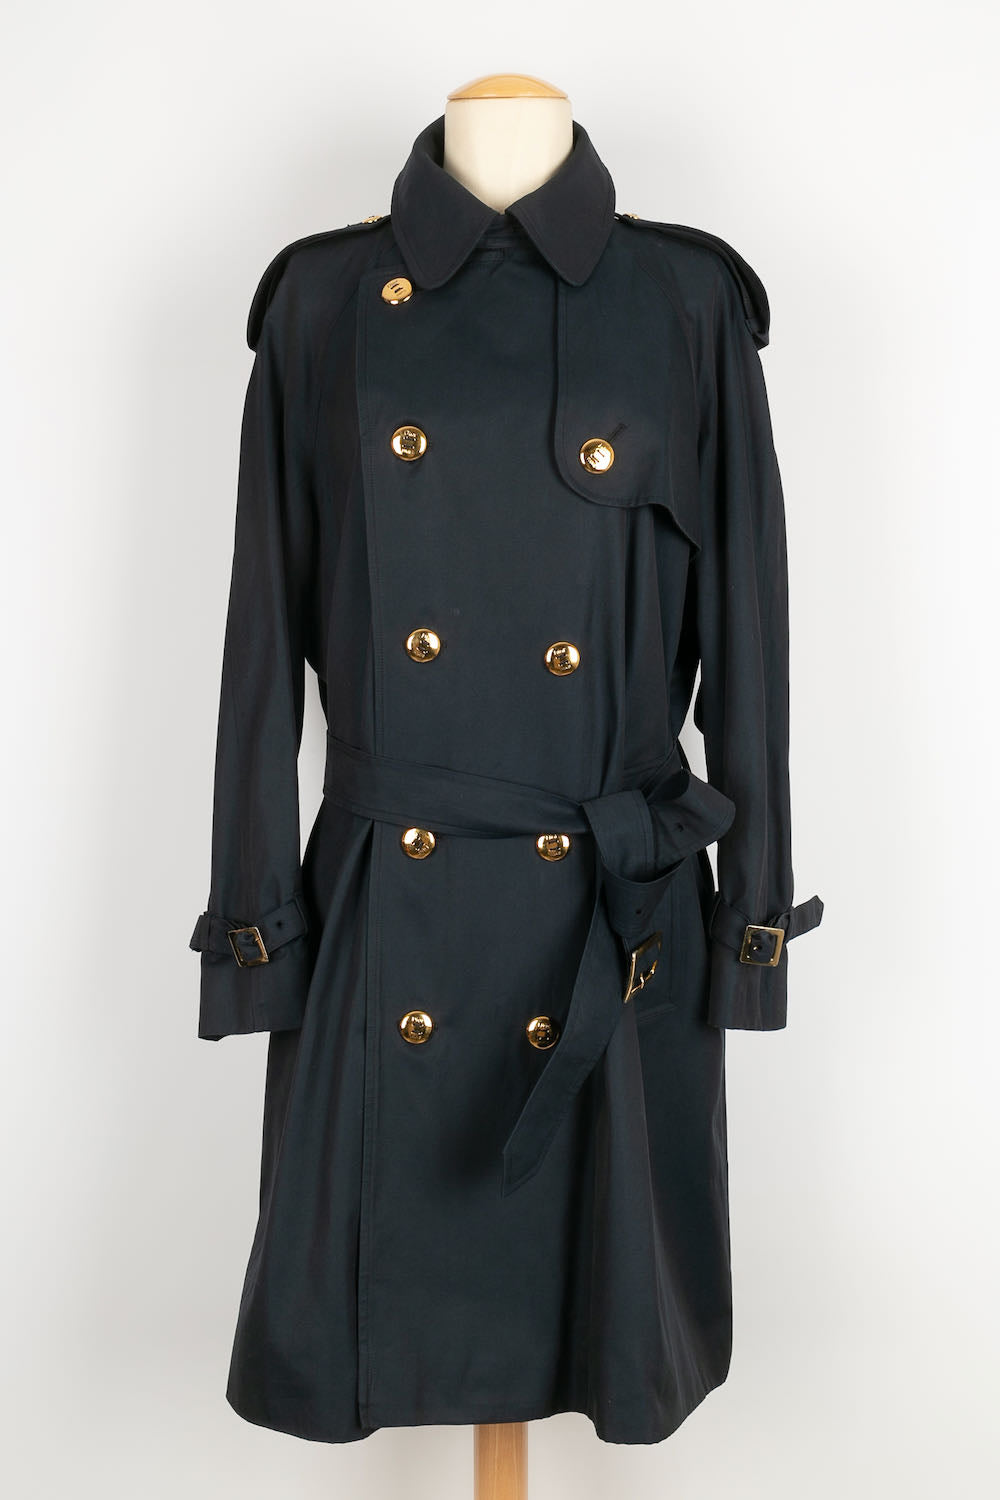 Christian Dior trench coat